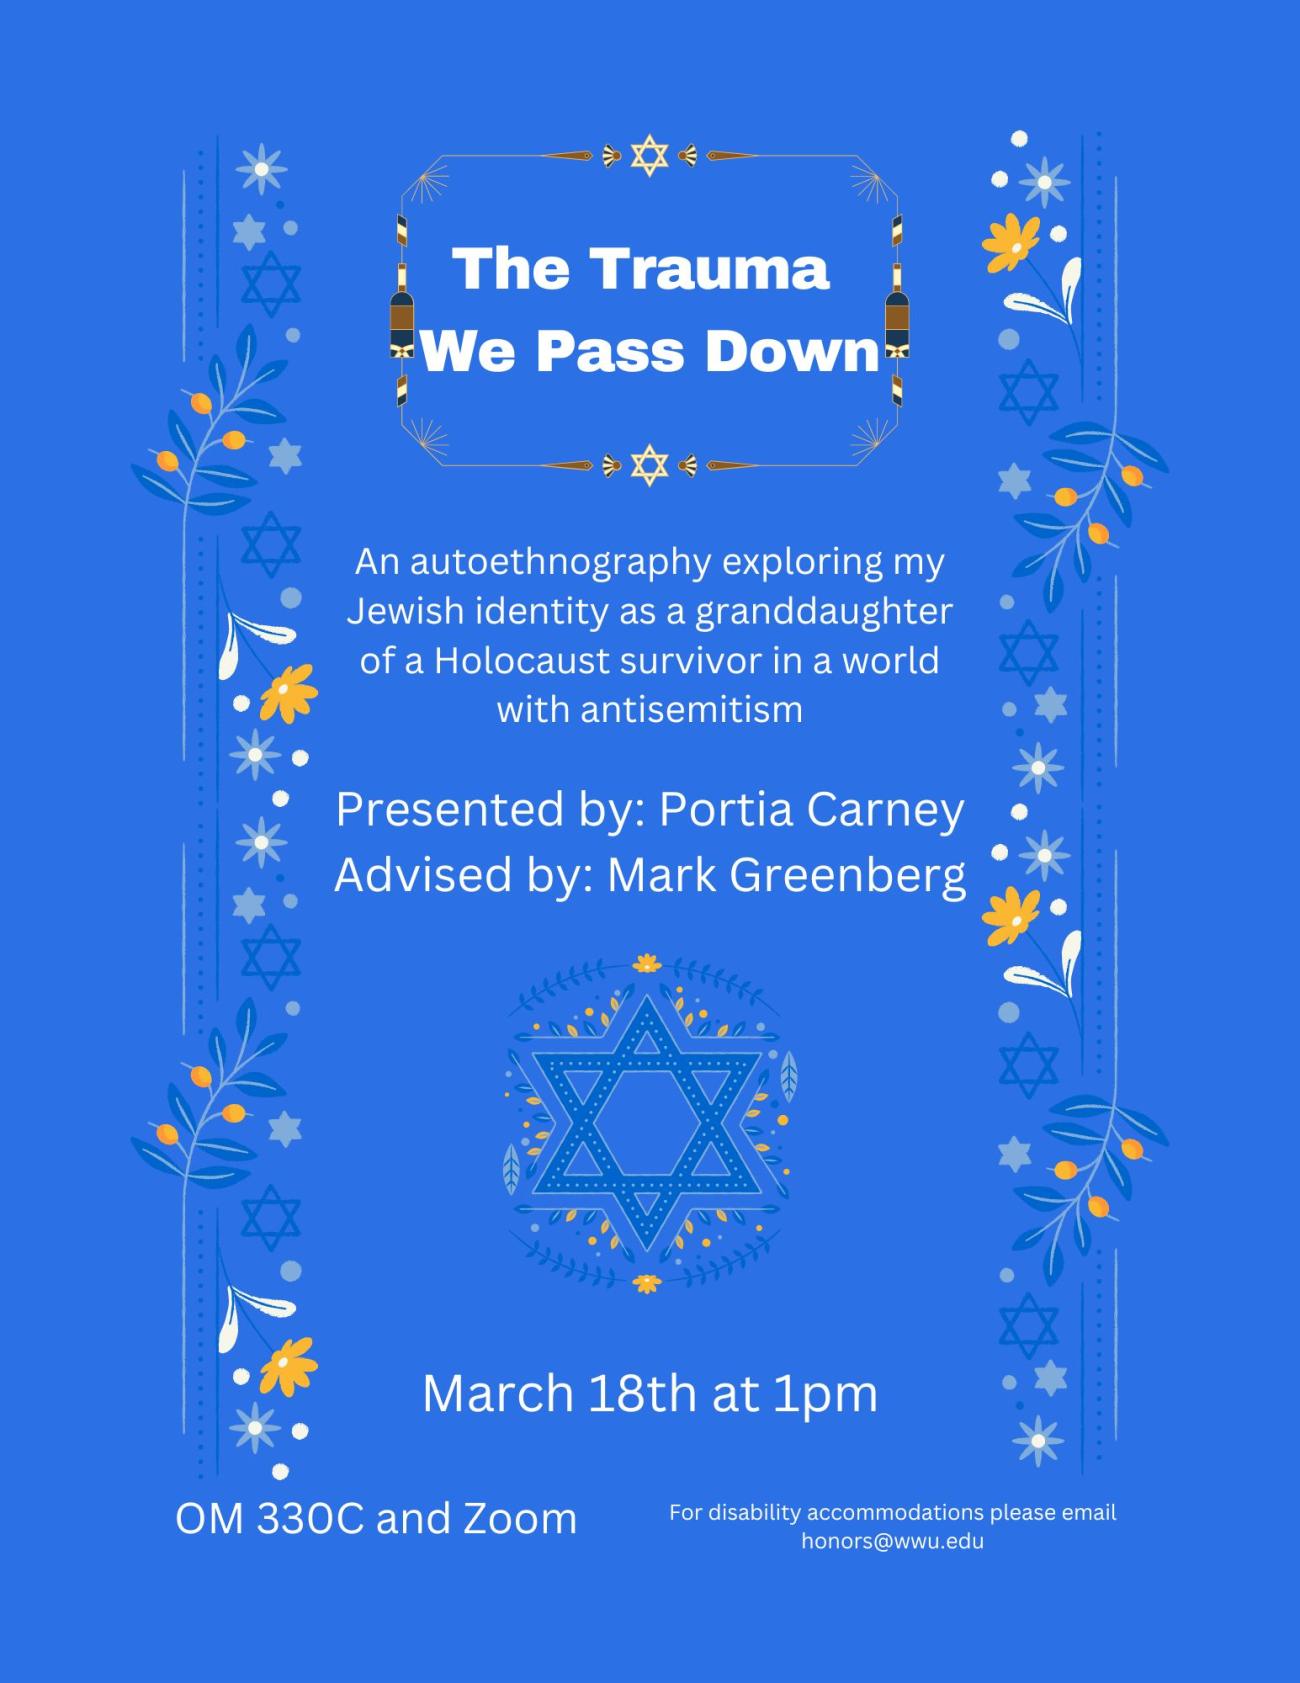 Alt Text: Blue background with a Star of David and flower border, and a Star of David image in the center. The text reads, "The Trauma We Pass Down. An autoethnography exploring my Jewish identity as a granddaughter of a Holocaust survivor in a world with antisemitism. Presented by Portia Carney. Advised by Mark Greenberg. March 18th at 1 pm. OM 330C and Zoom. For disability accommodations please email honors@wwu.edu."